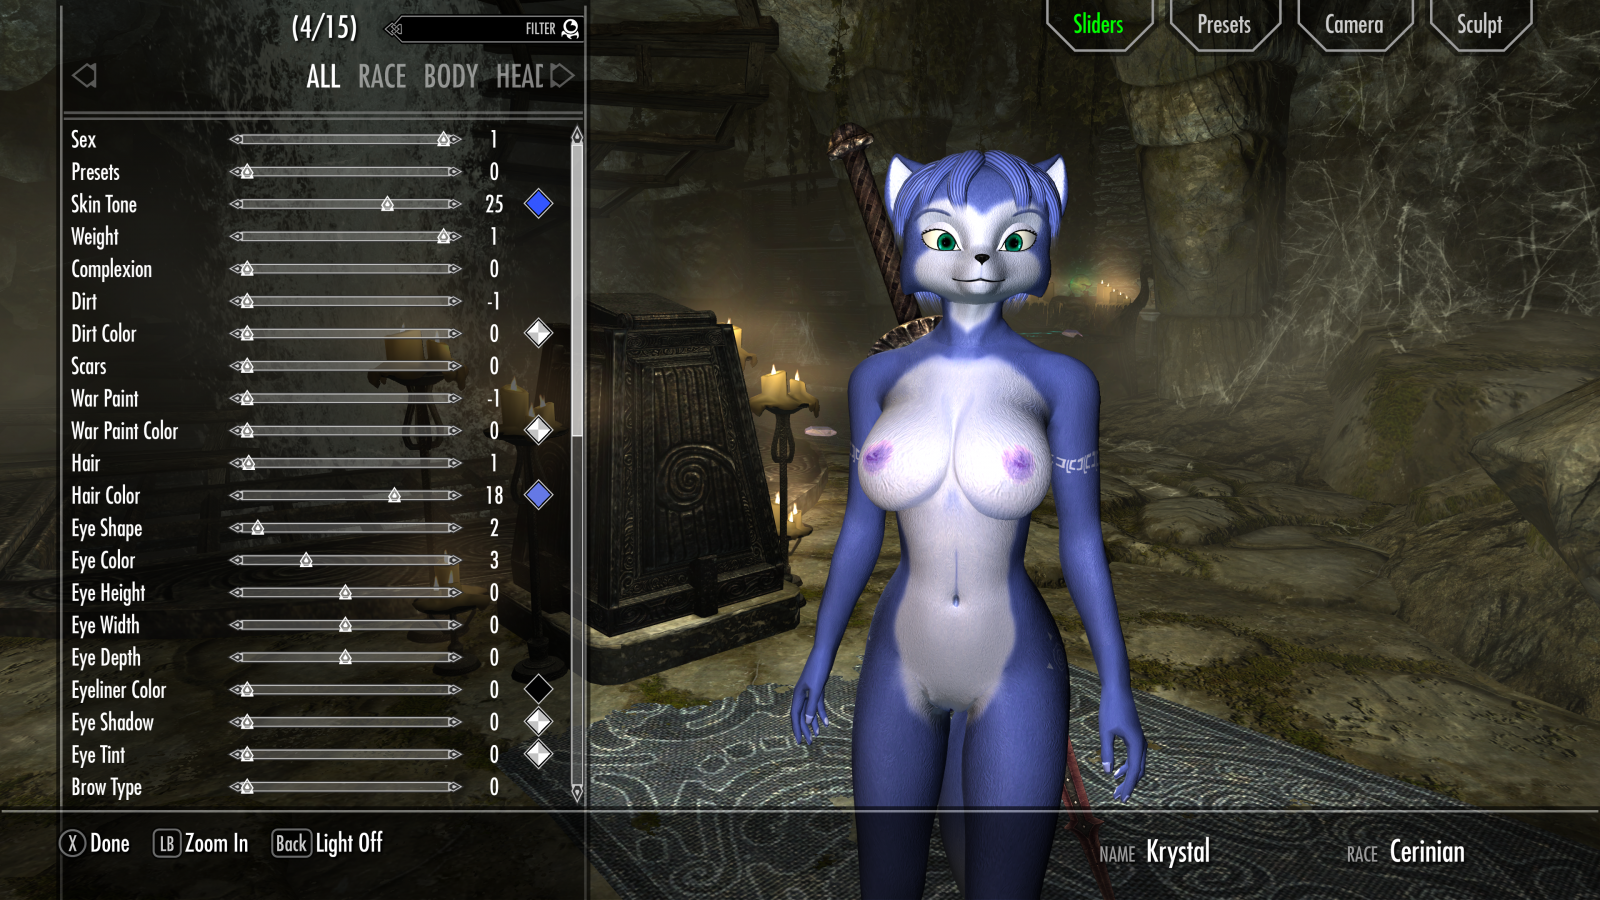 Nudity Of The Modded Character Request And Find Skyrim Adult And Sex